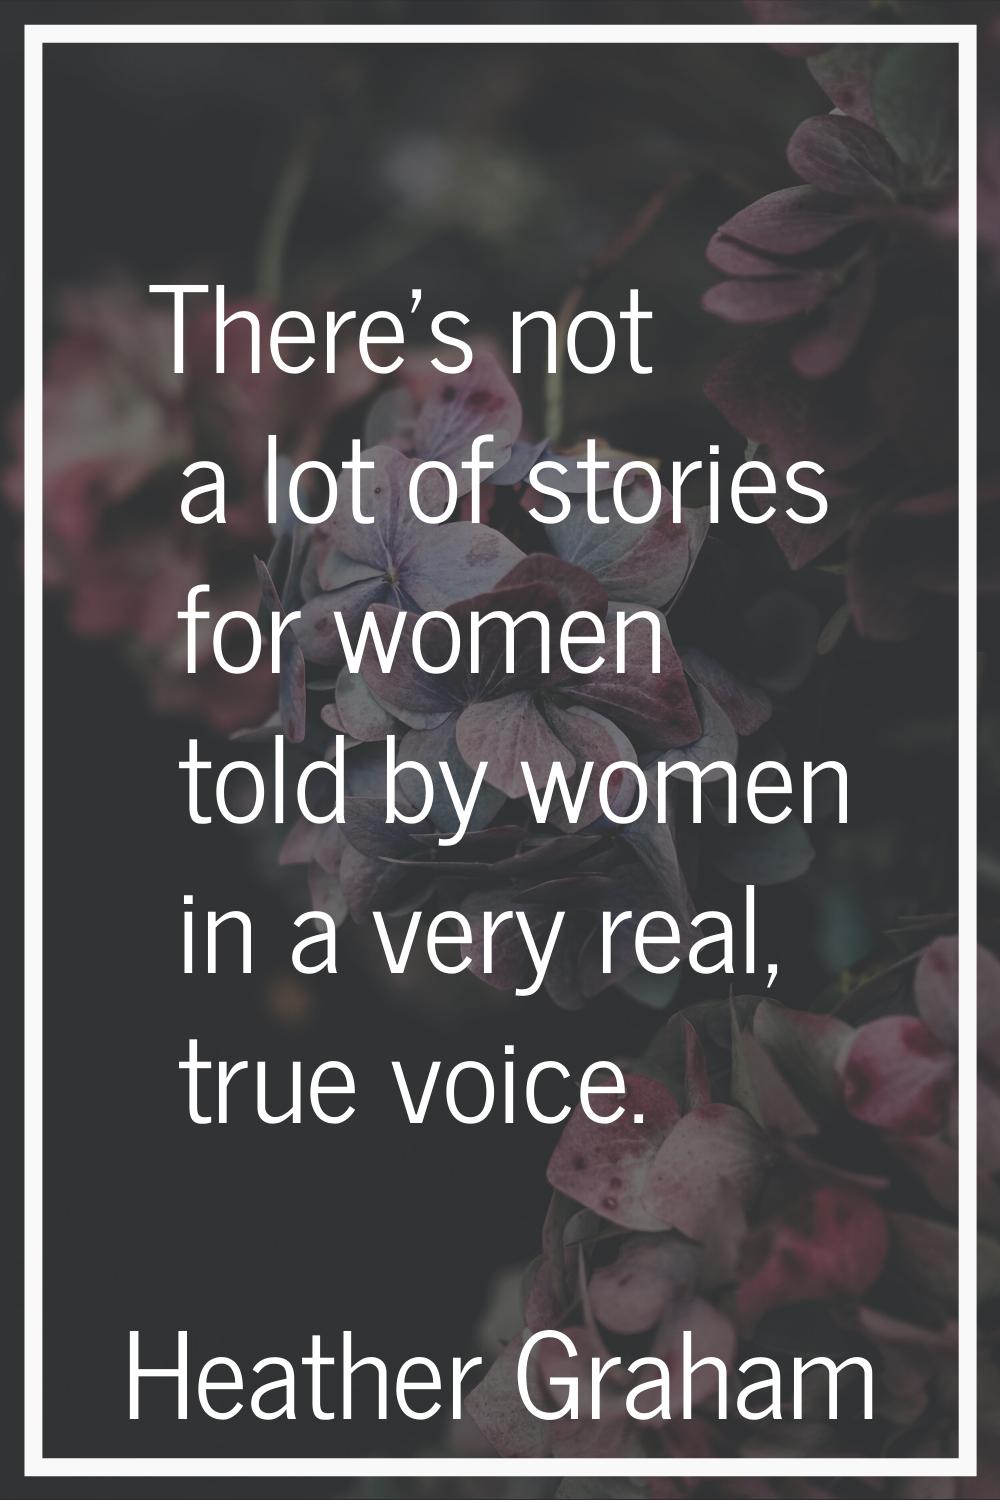 There's not a lot of stories for women told by women in a very real, true voice.